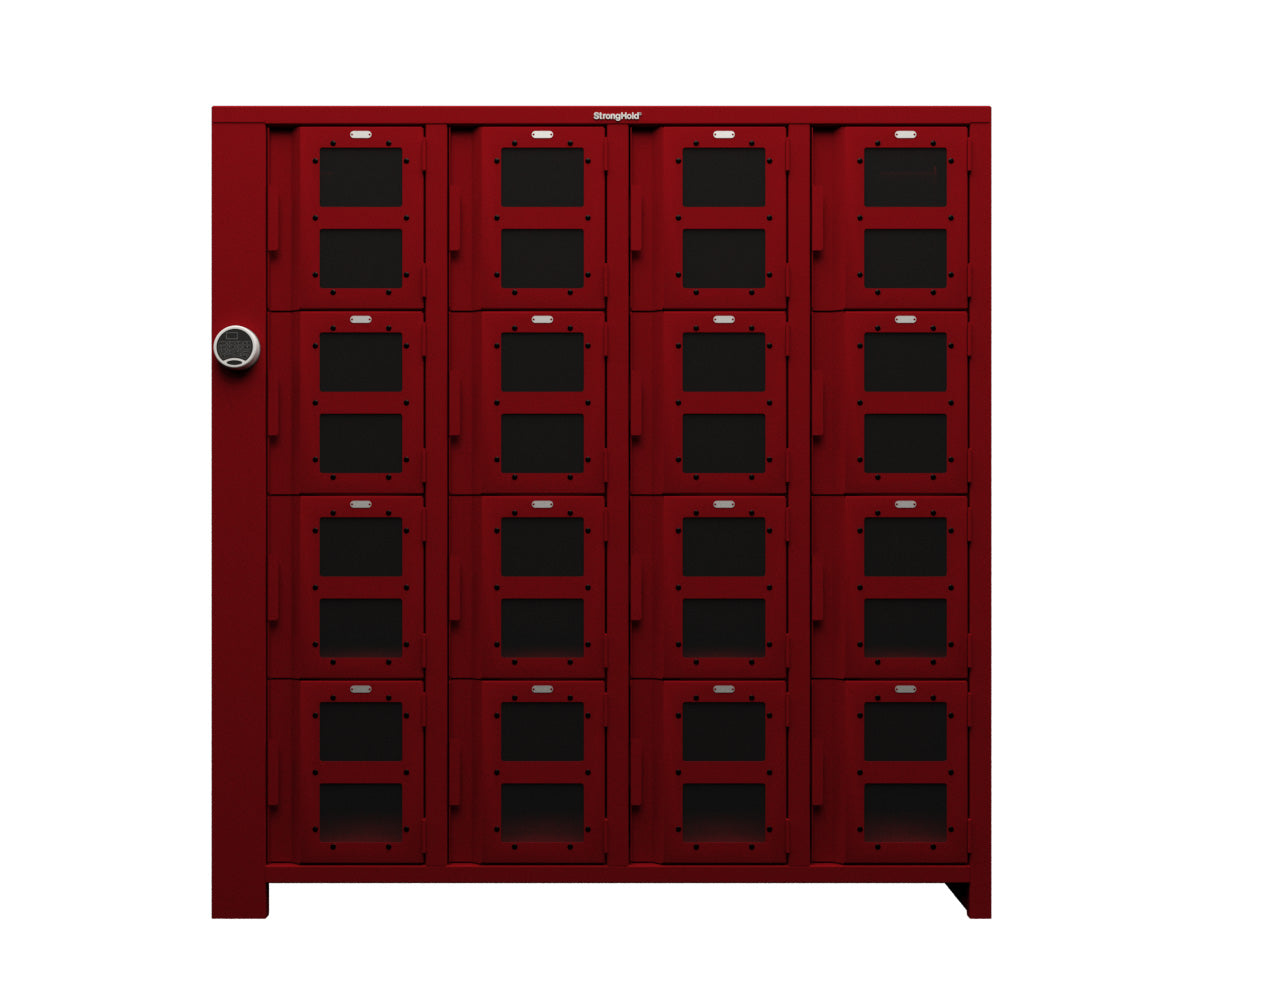 Extra Heavy Duty SIMPLE Locker - Single Input Multi-Point Locking Entry - Access Control Locker with 16 Clearview Doors  -  72" W x 24" D x 75" H